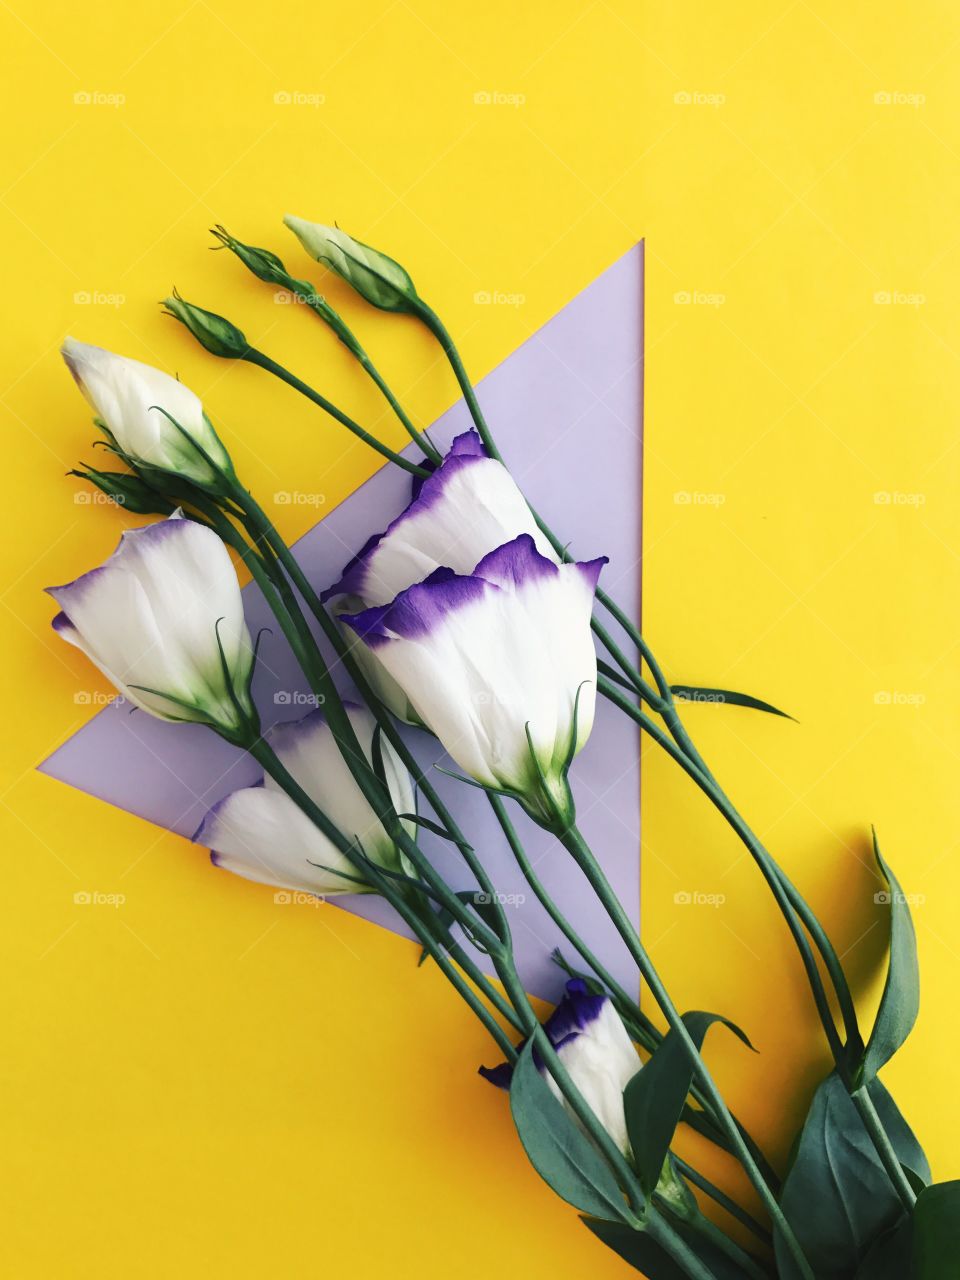 Top view of white and purple flower bouquet on vibrant yellow and purple triangle background 